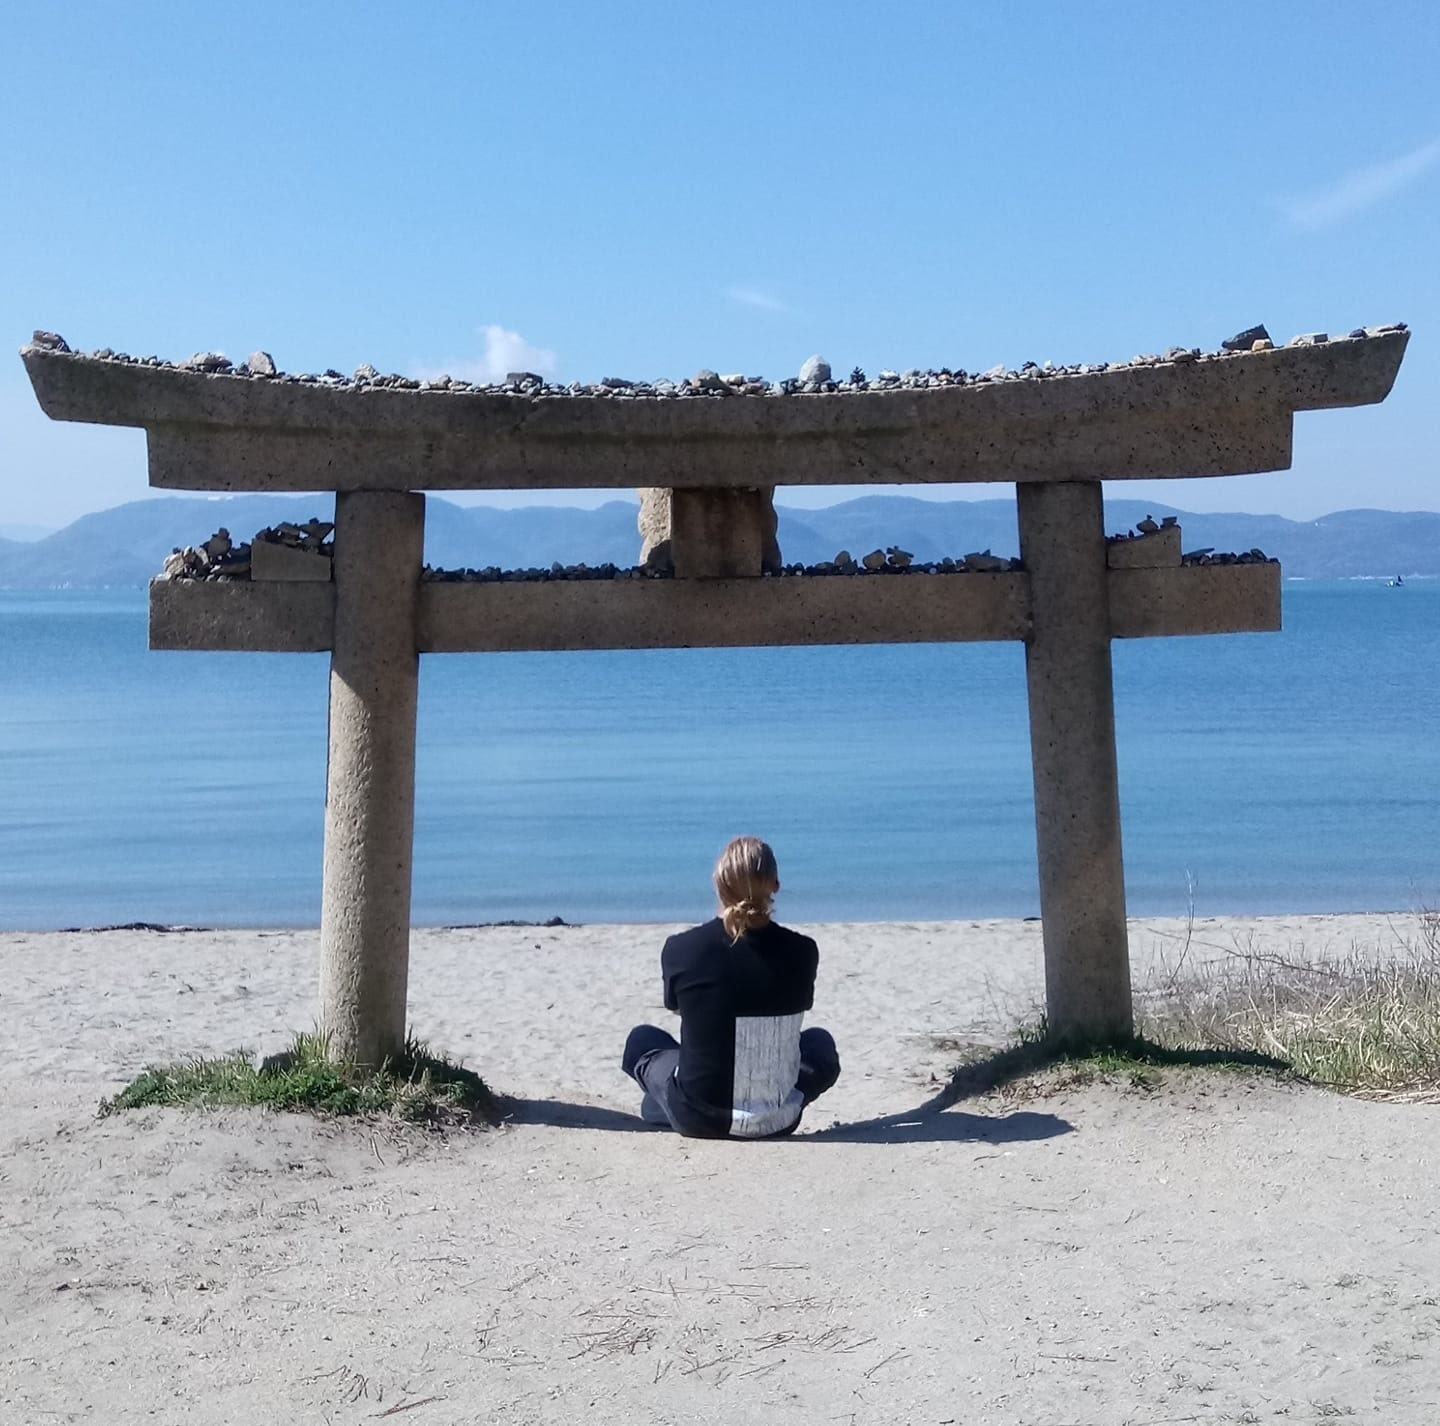 A relaxing beachside scene beneath a stone Shinto torii gate covered with stones left by believers on the art island of Naoshima